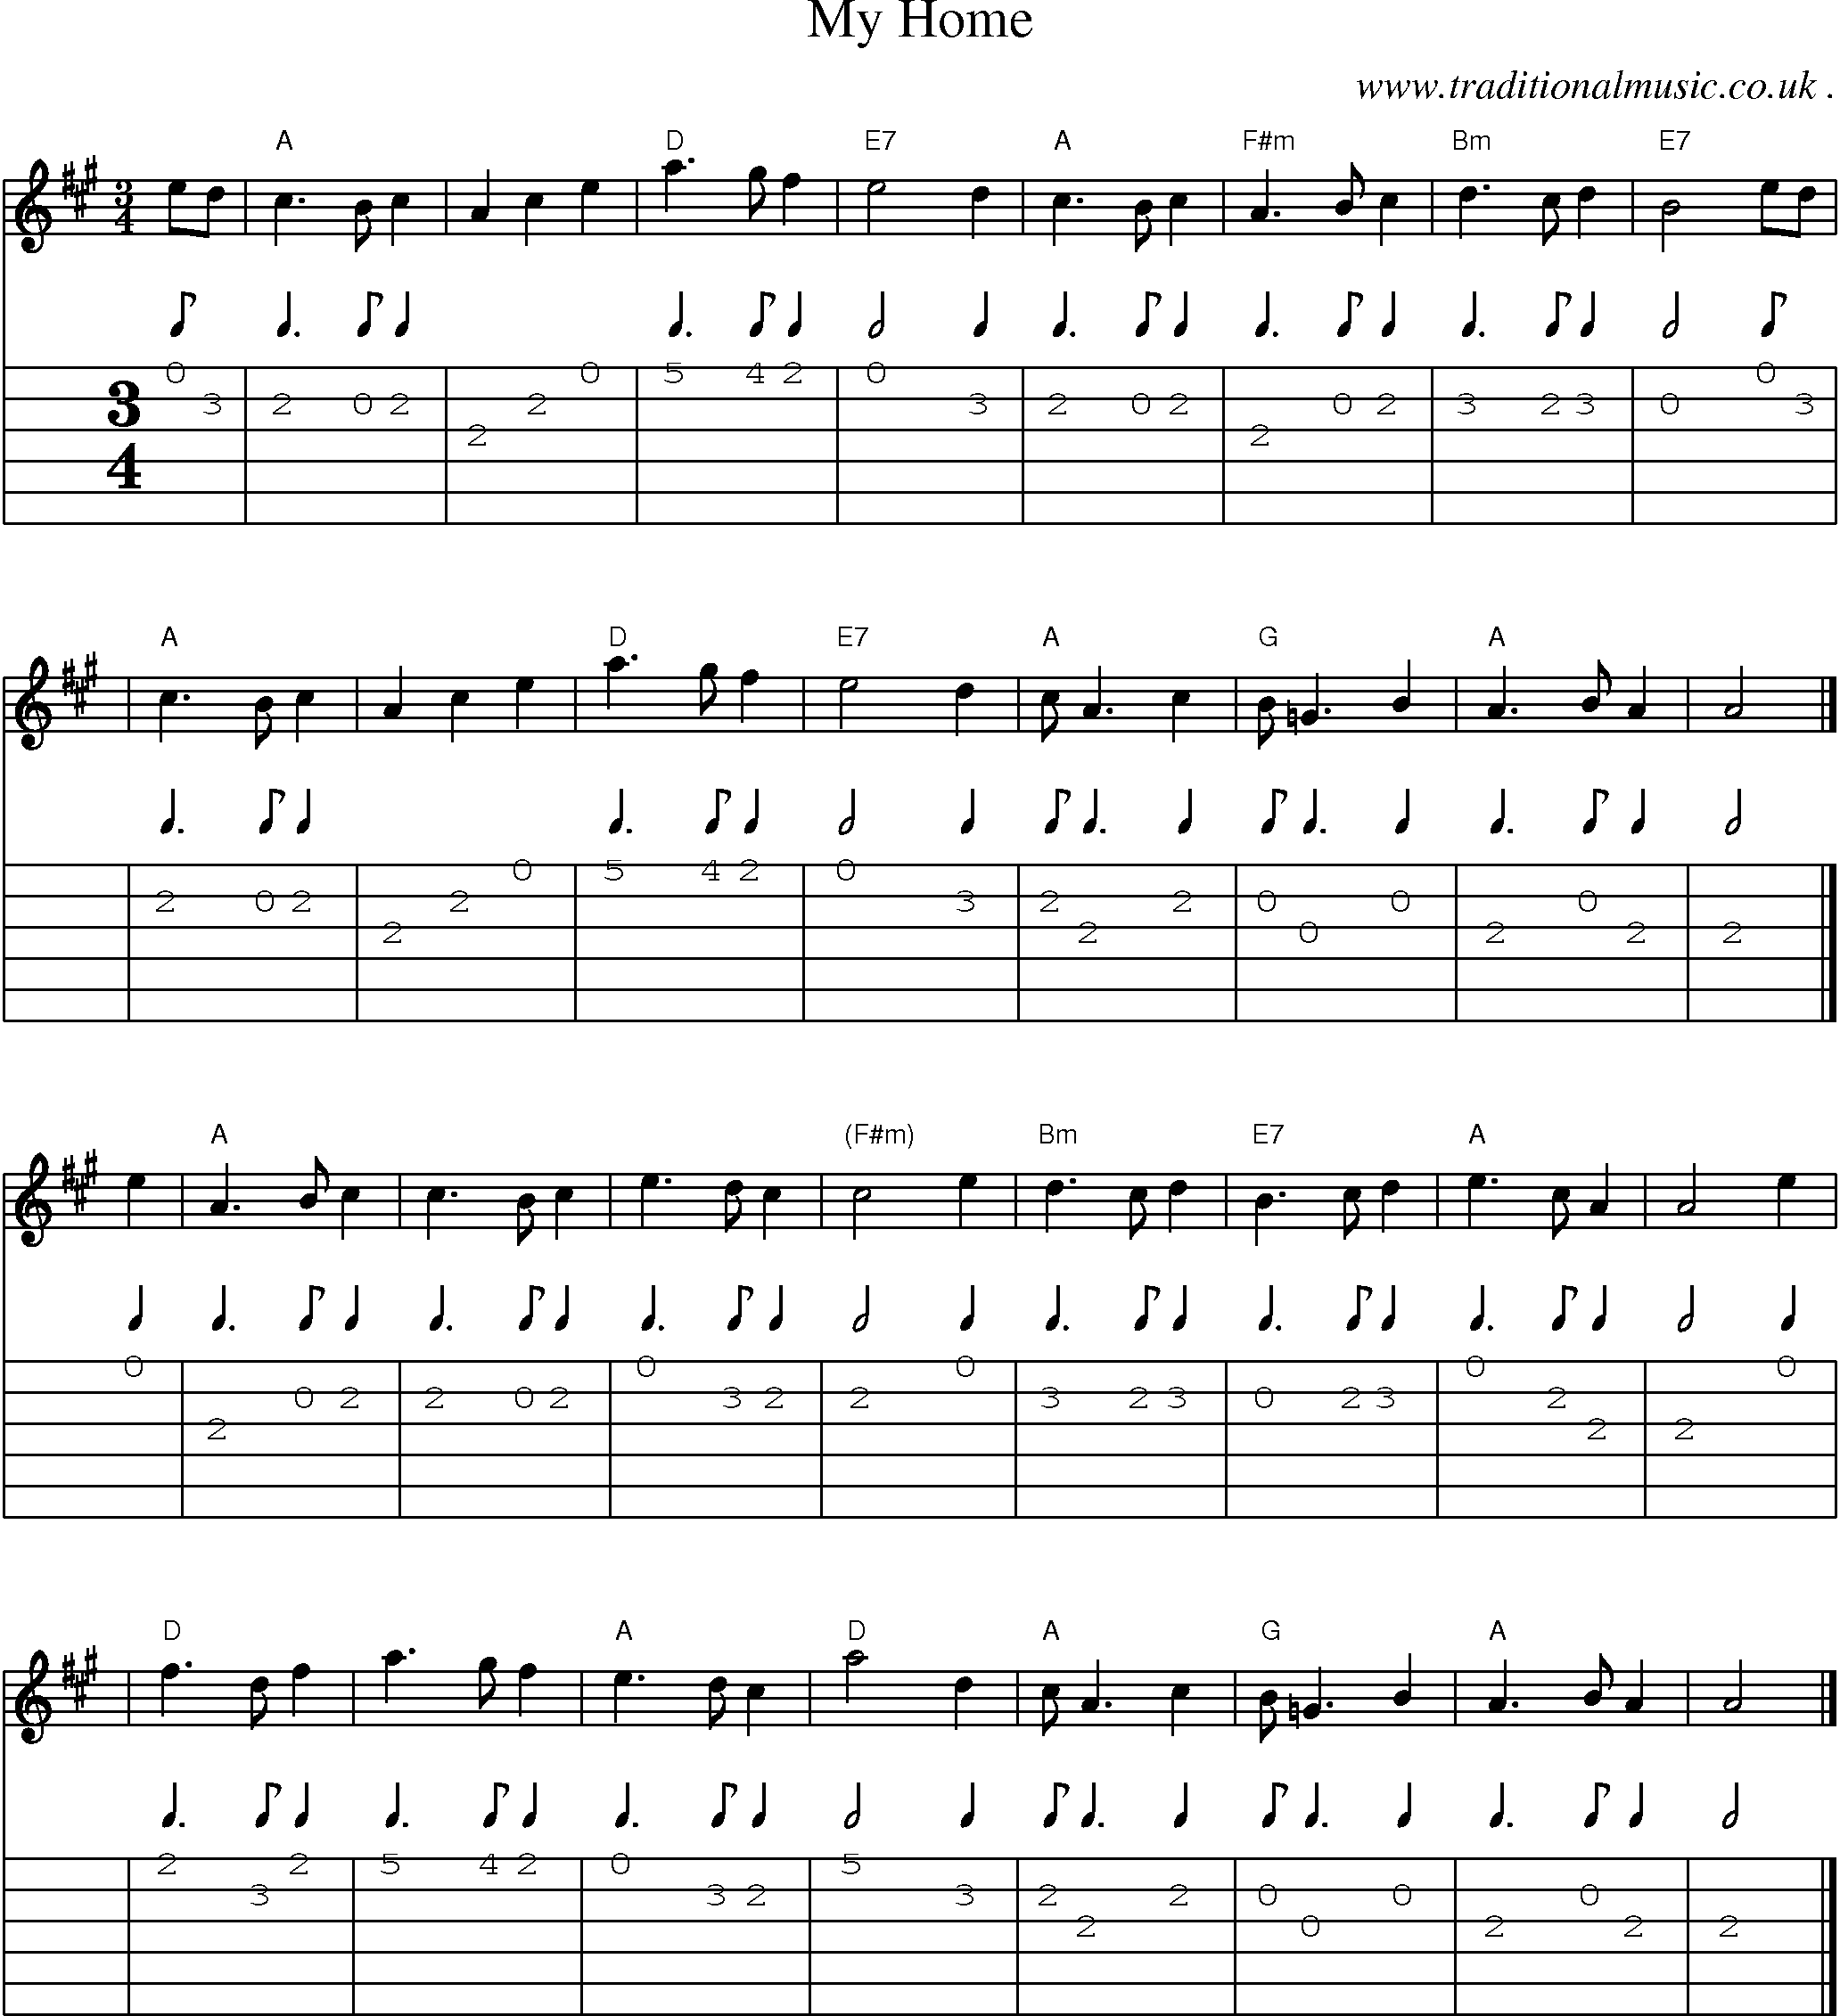 Sheet-music  score, Chords and Guitar Tabs for My Home